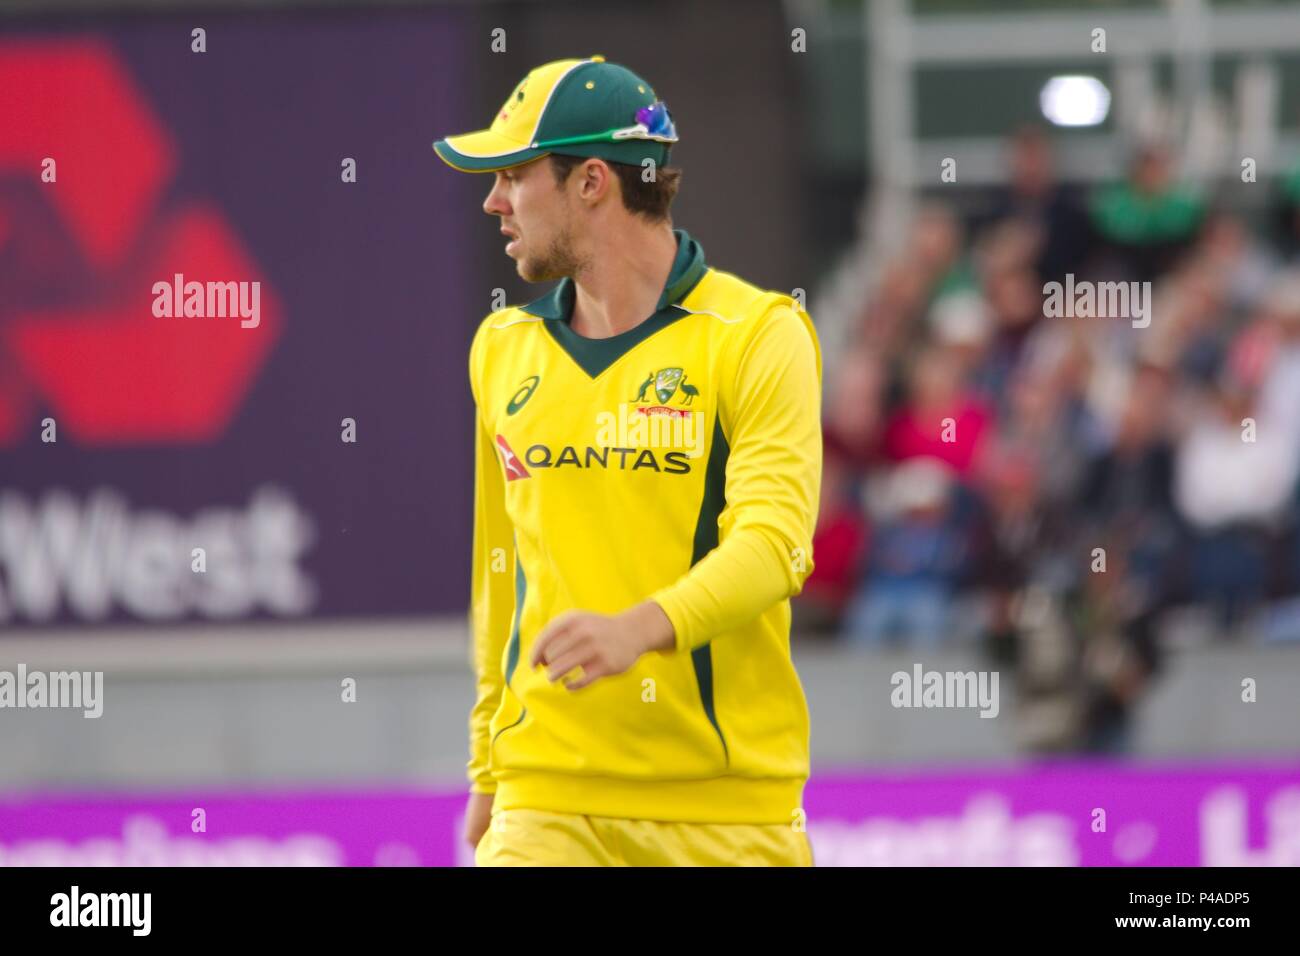 Chester-le-Street, England 21 June 2018. Travis Head fielding for Australia against England in the fourth ODI at Emirates Riverside. Credit: Colin Edwards/Alamy Live News. Stock Photo